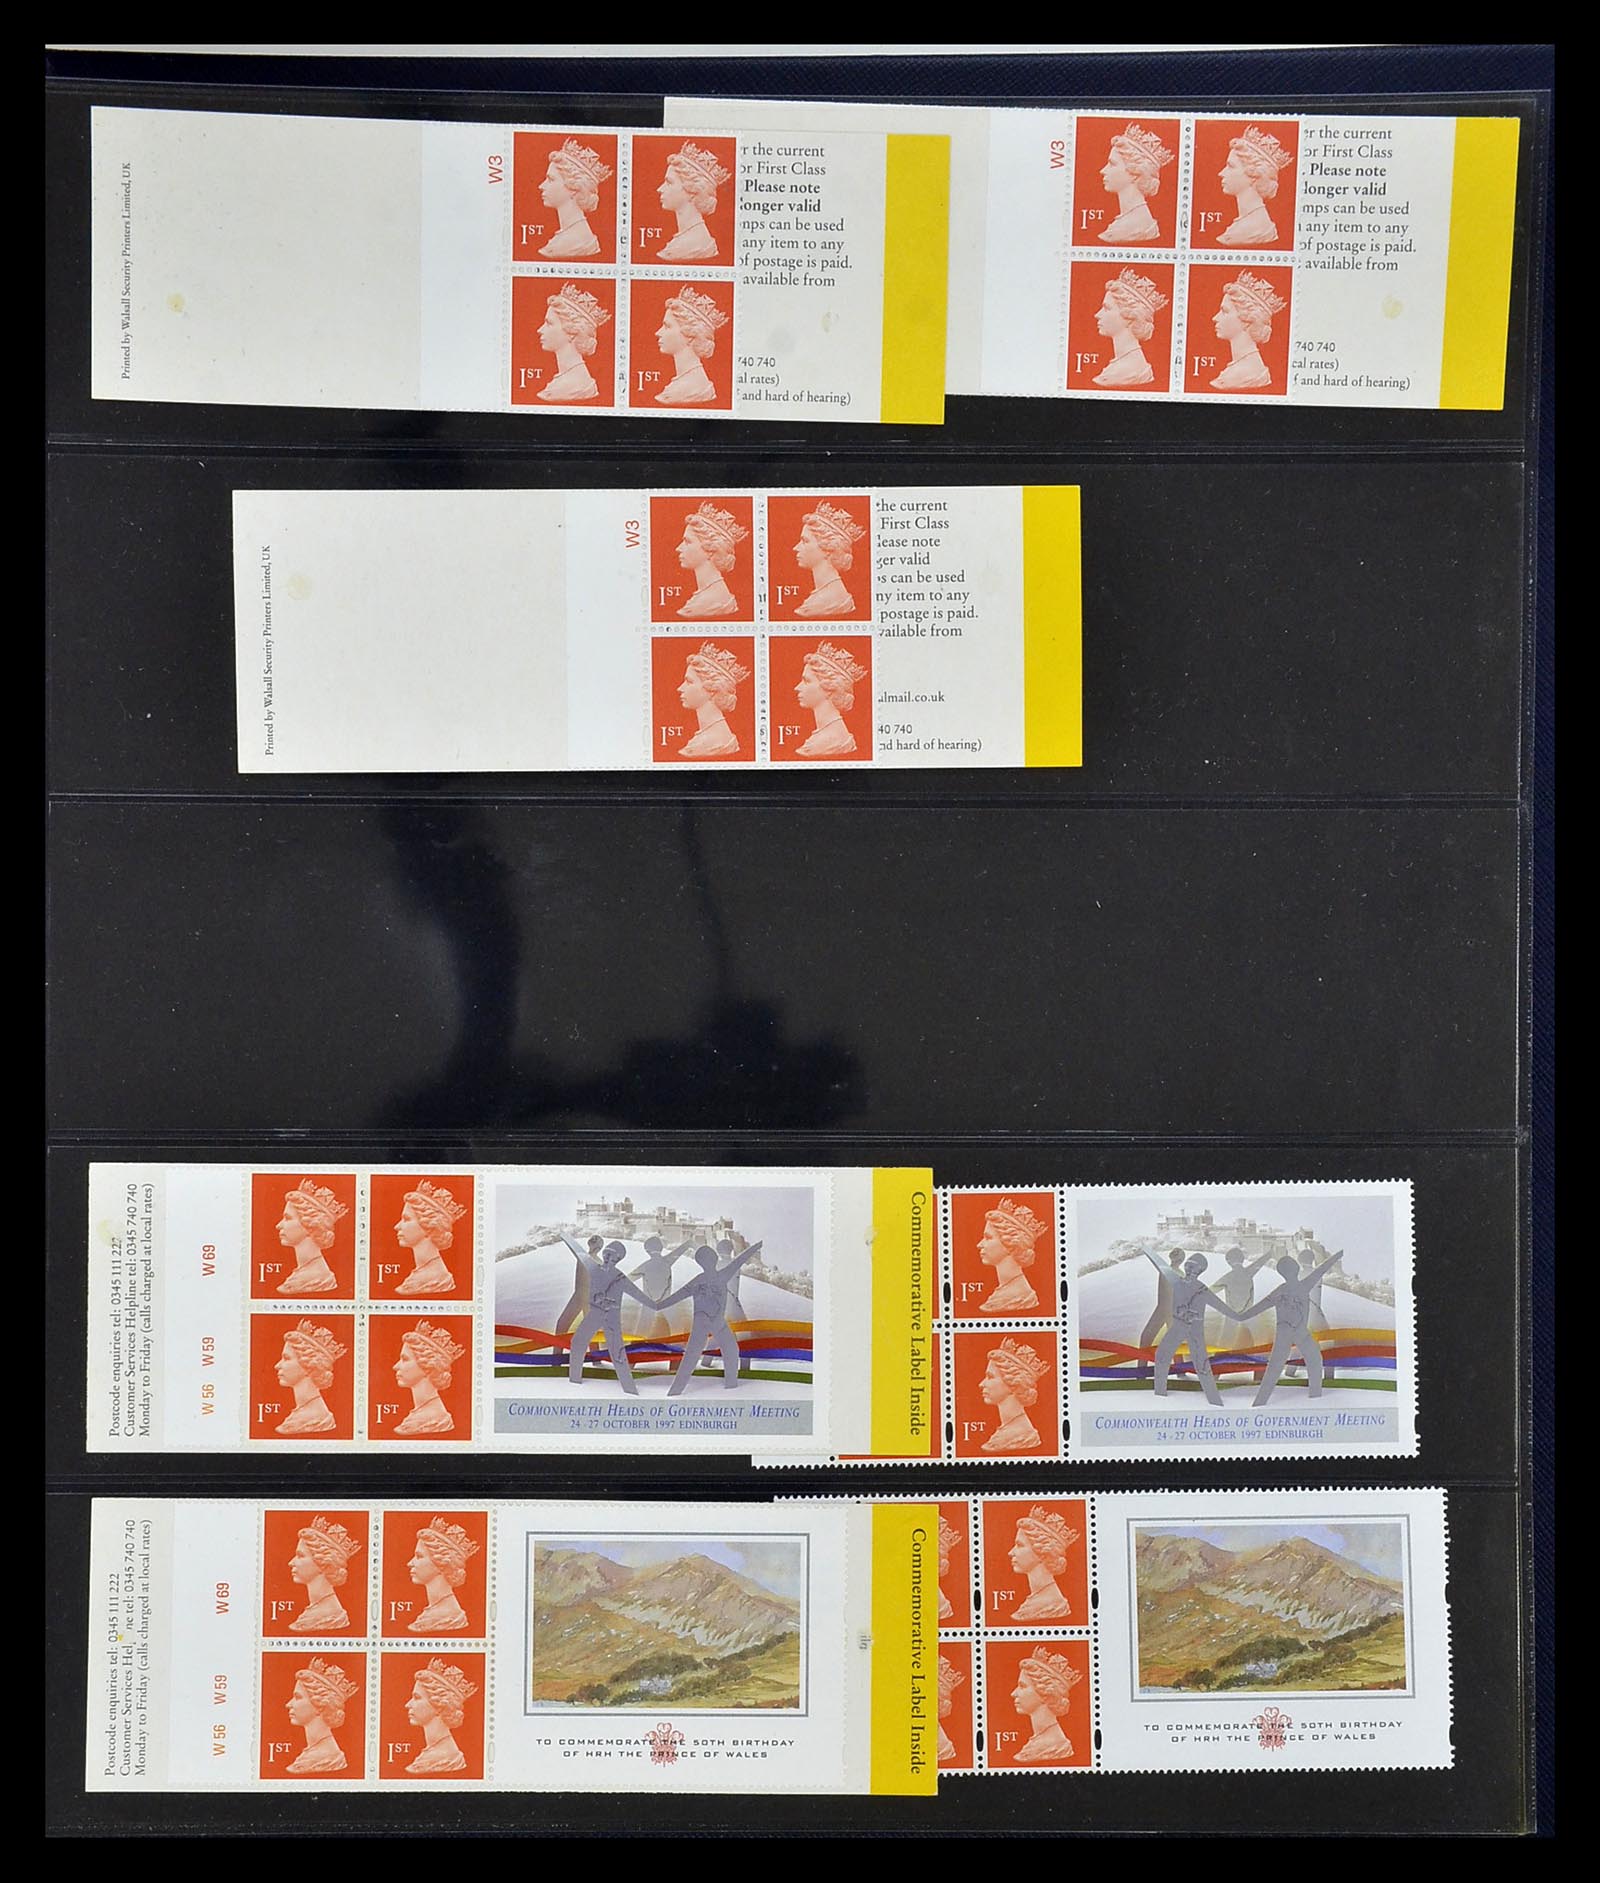 35082 025 - Stamp Collection 35082 Great Britain first class stamp booklets.